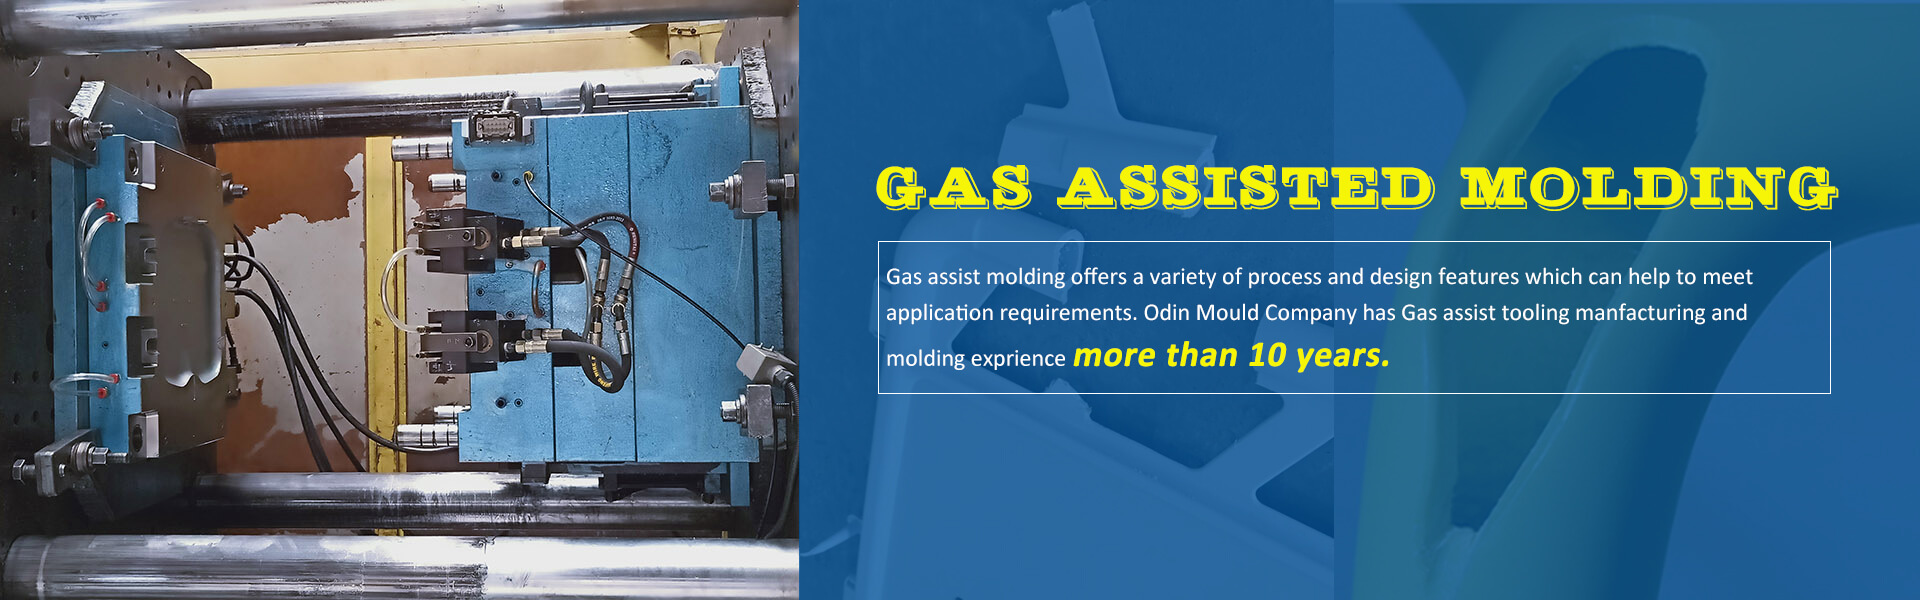 GAS ASSISTED MOLDING 01